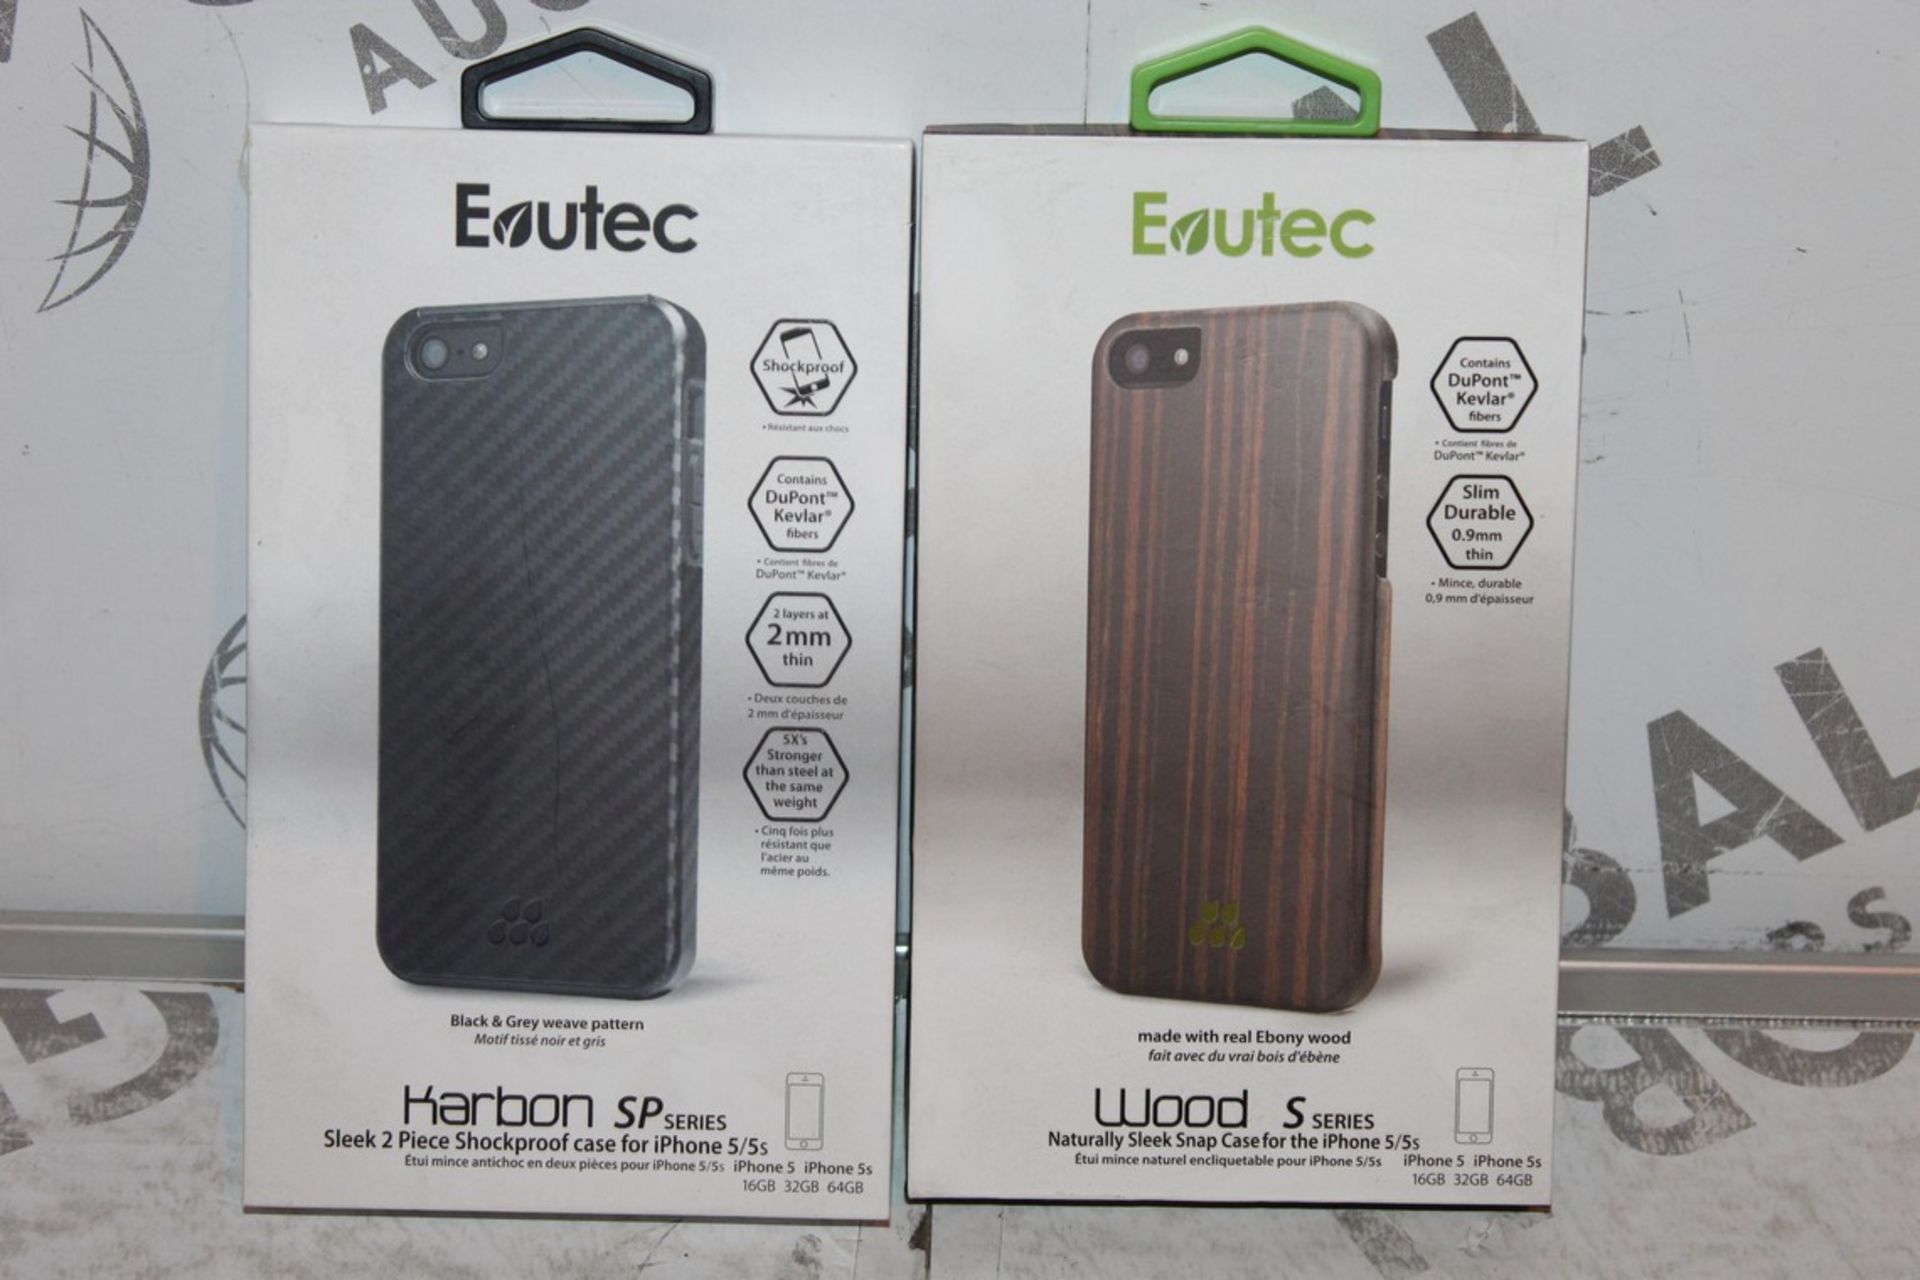 Lot to Contain 10 Brand New Assorted Evutec Wood and Carbon Series iPhone Cases Combined RRP £100